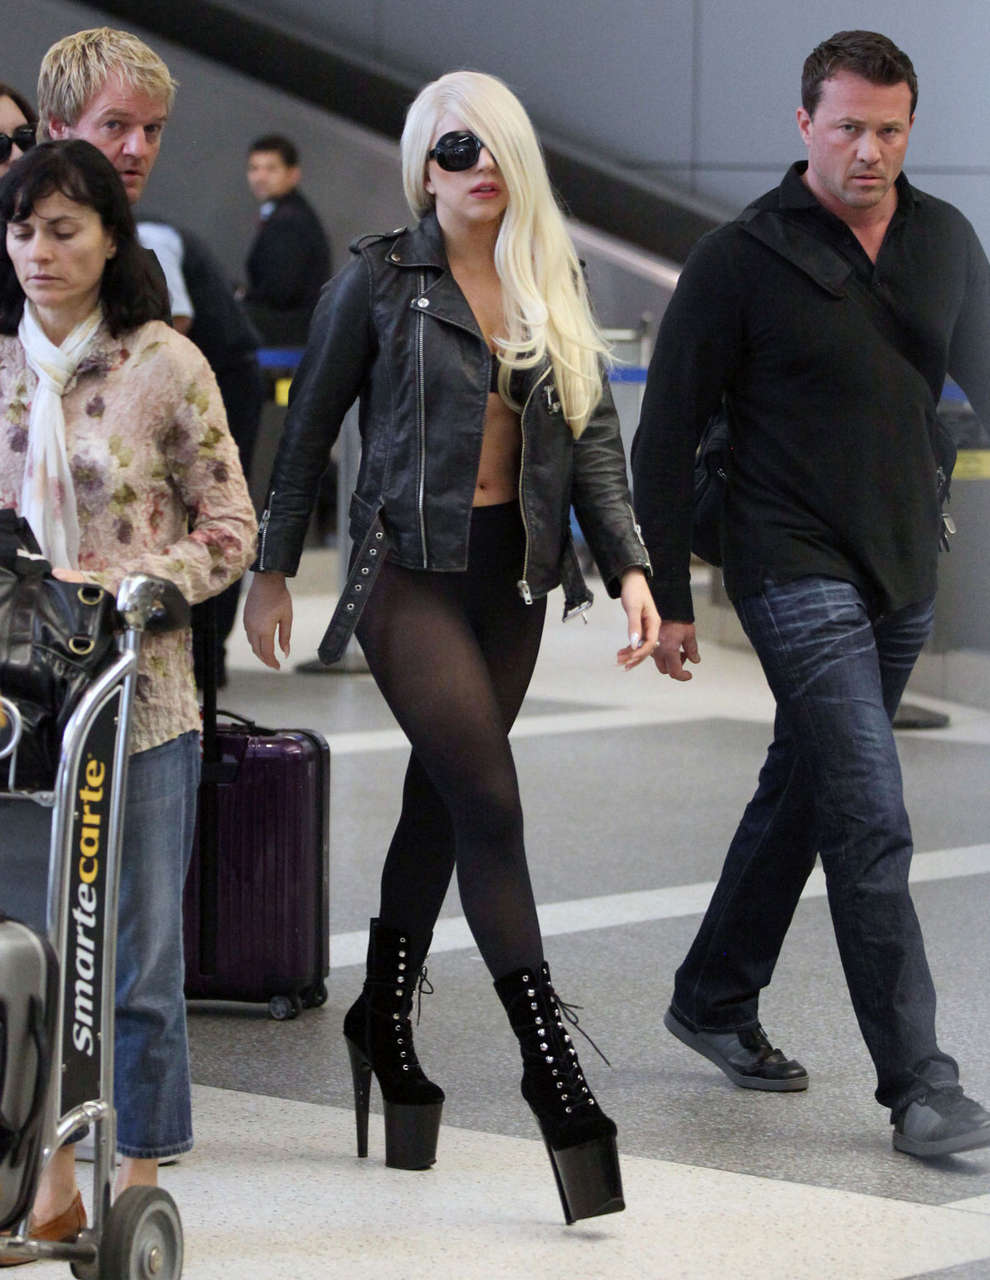 Lady Gaga Forgets Her Skirt Lax Airport